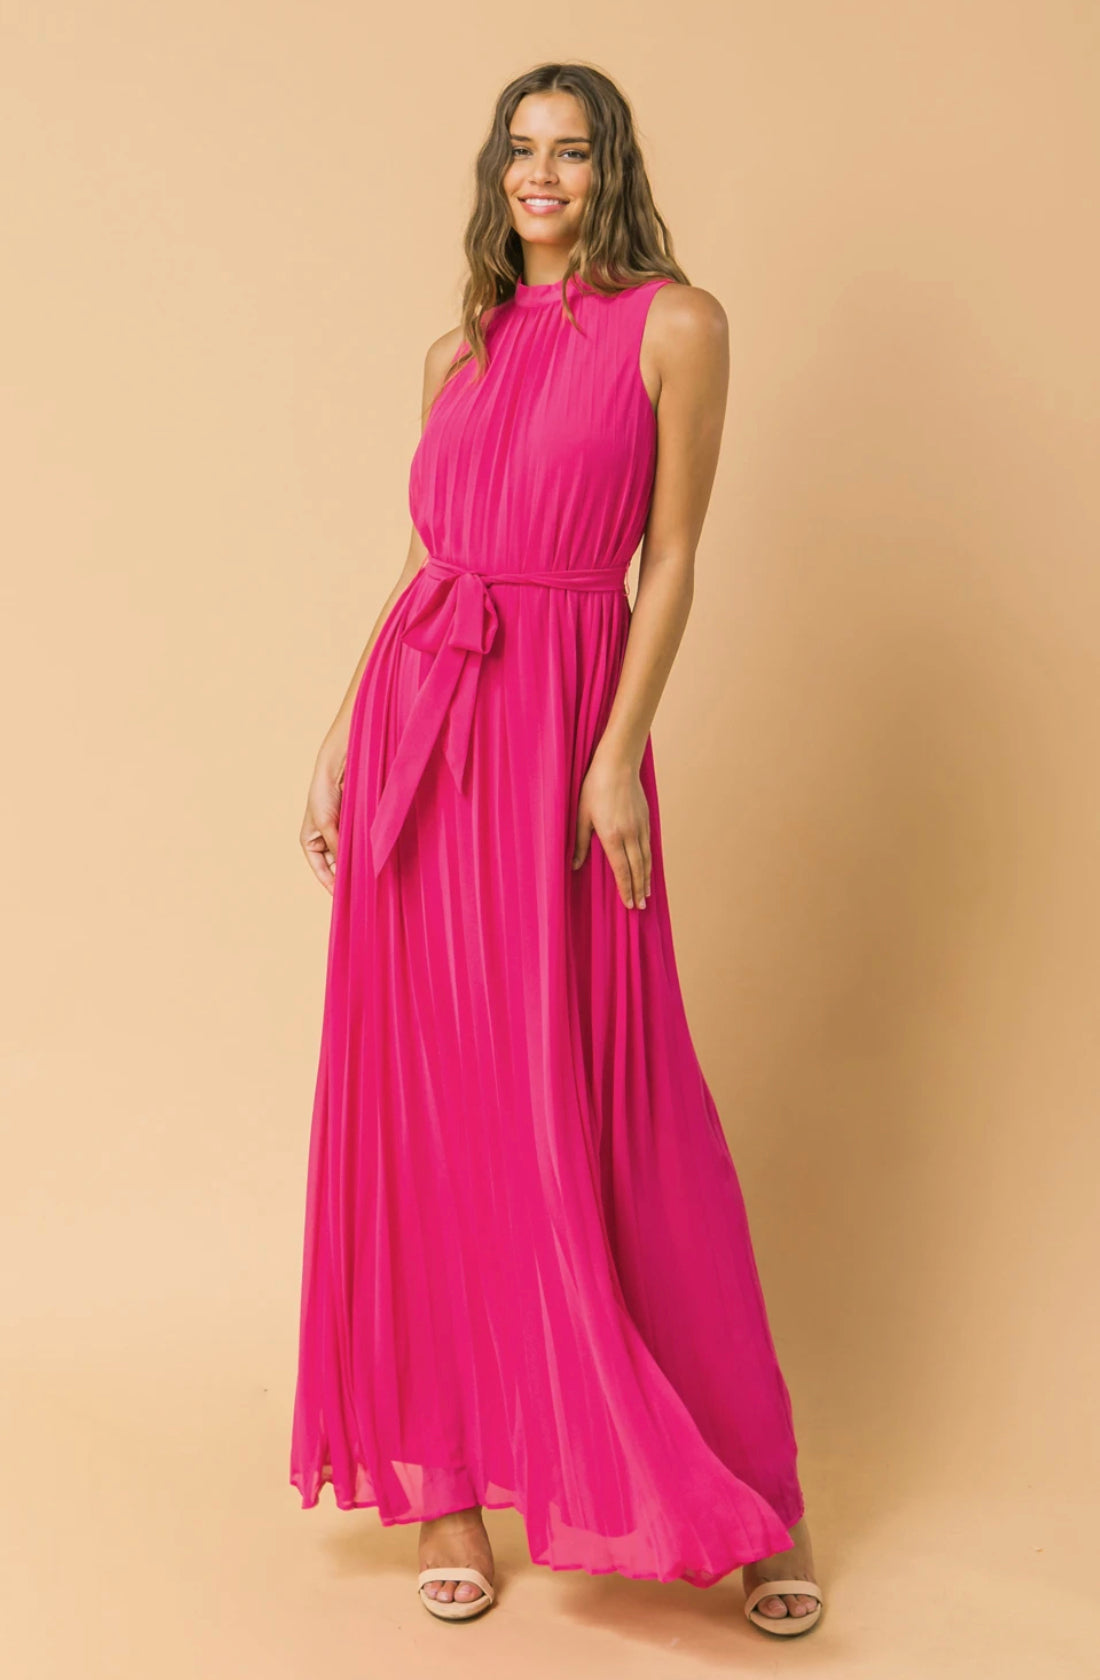 I Owe You Woven Maxi Dress - Solid Fuchsia Woven Baby Pleated Dress, Sizes Small to Large